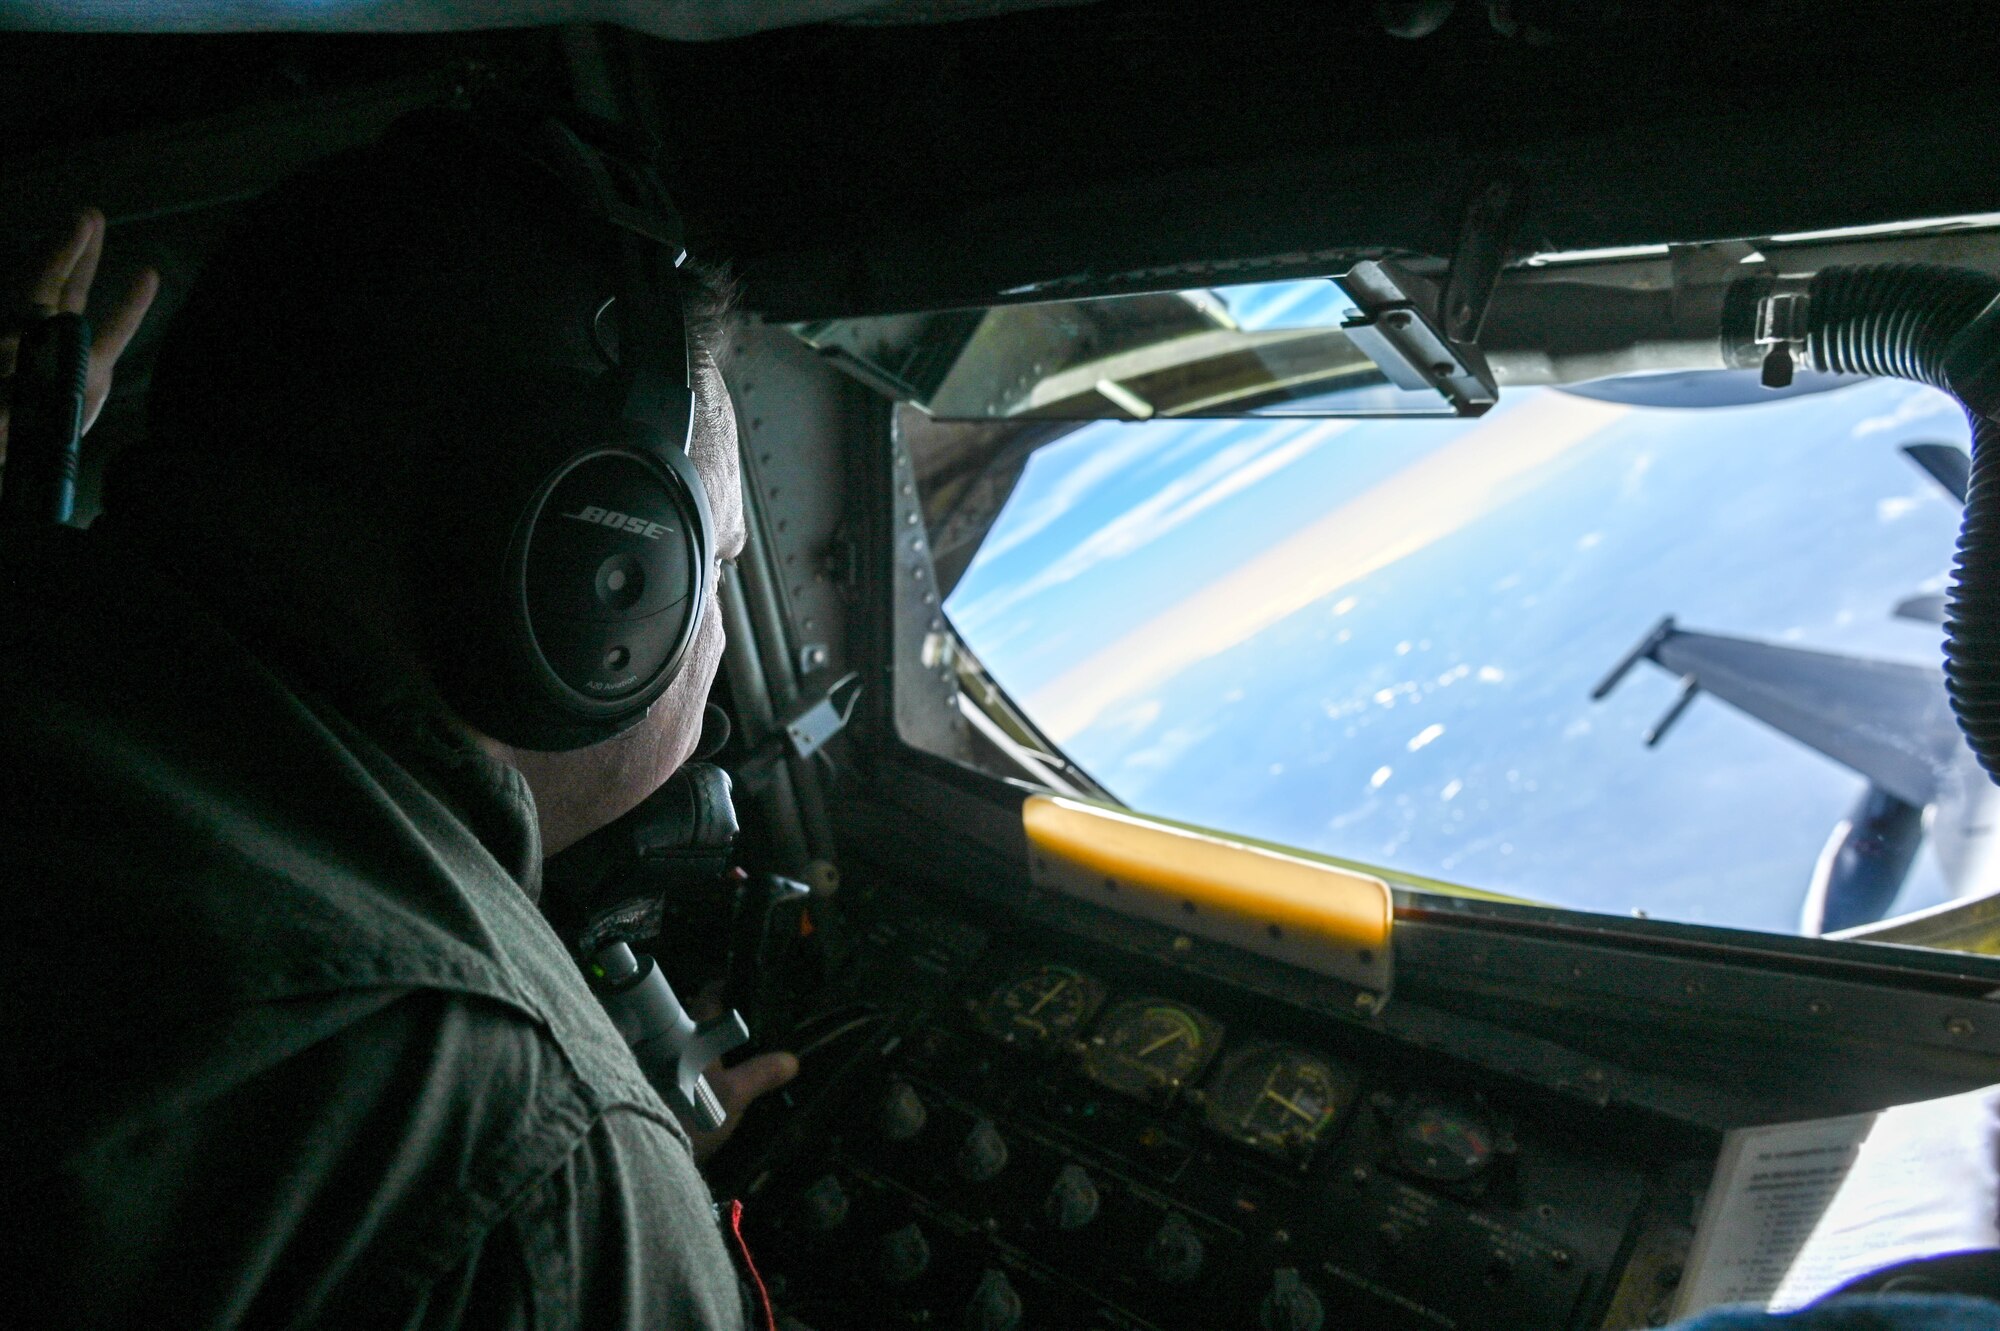 Chief Master Sgt. Steven Robinson, 465th Air Refueling Squadron chief boom operator, refuels an F-16 from the 93rd Fighter Squadron at Homestead Air Reserve Base, Florida, from a KC-135 Stratotanker from the 465th ARS at Tinker Air Force Base, Oklahoma, Jan 27, 2021. This business effort training mission ensured that aircrew on multiple platforms received the necessary upgrade and competency training required to remain fully mission capable. (U.S. Air Force photo by Senior Airman Mary Begy